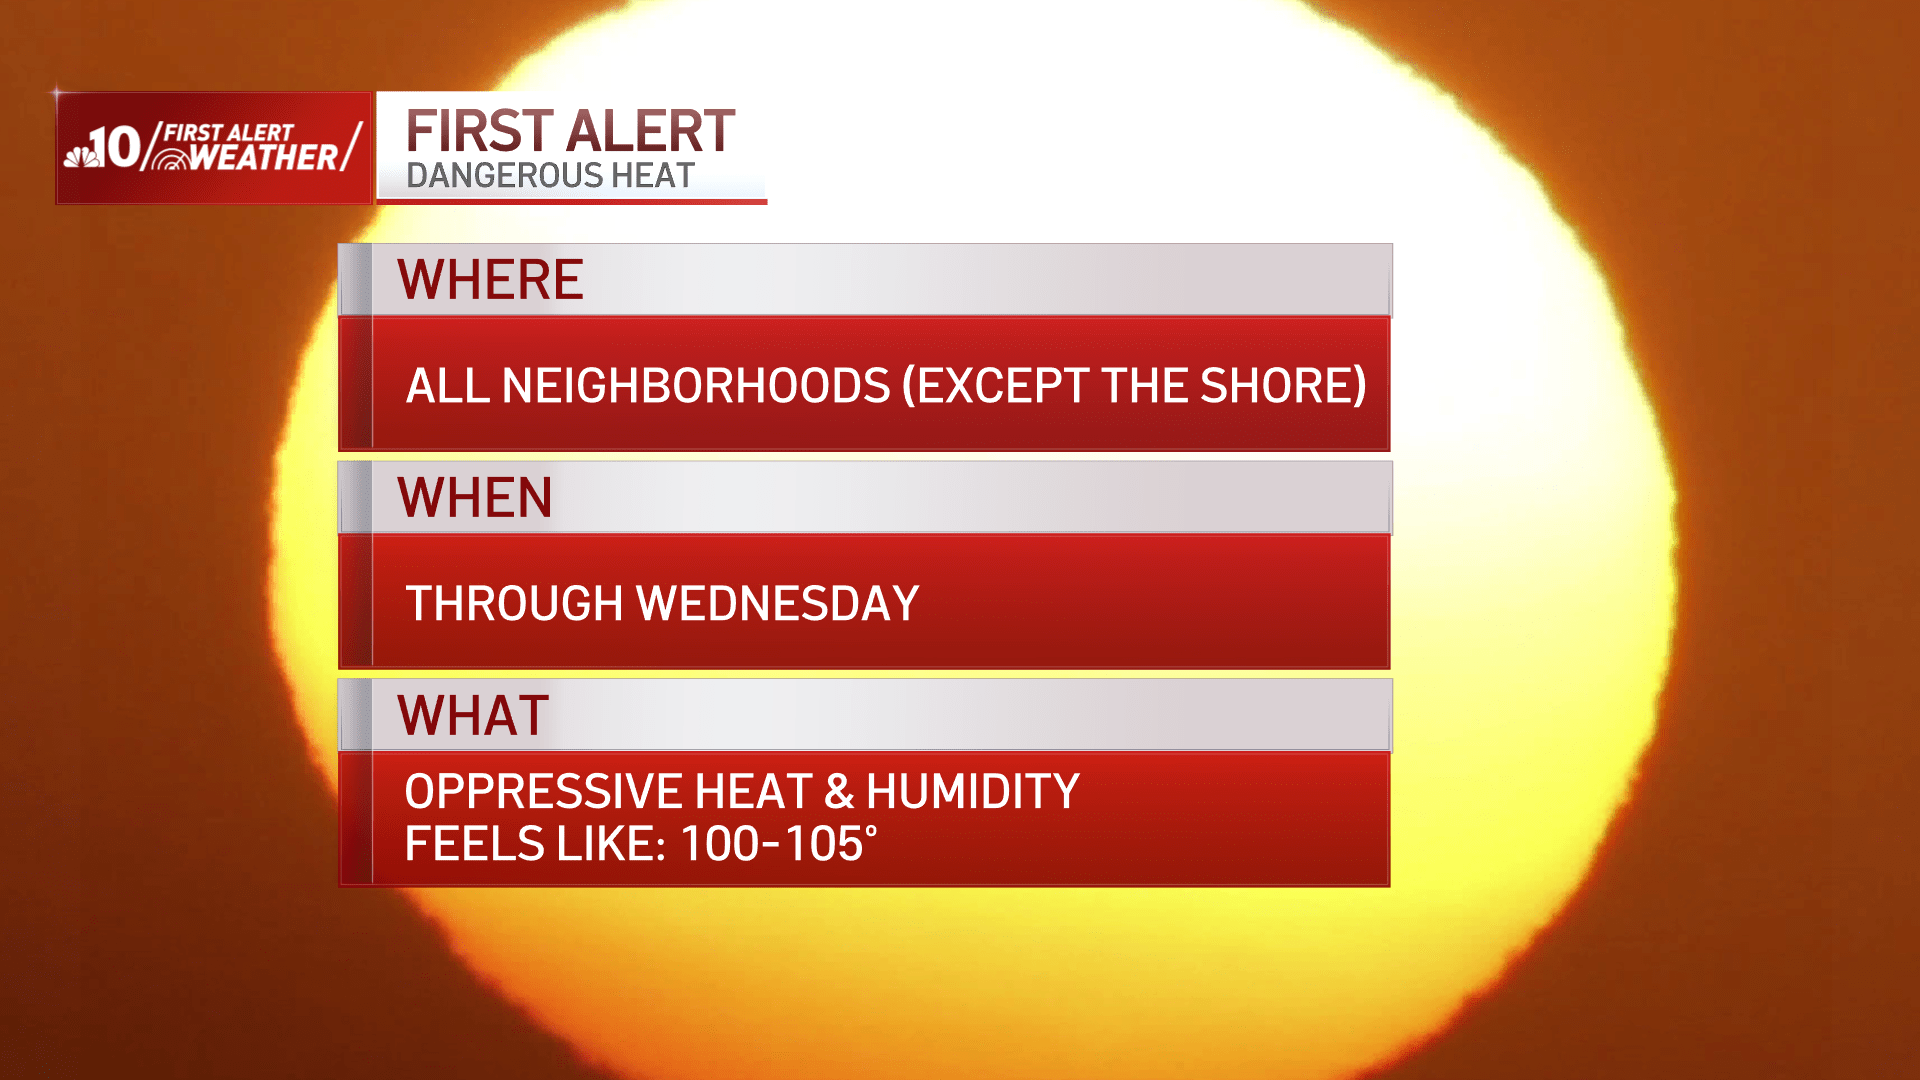 Graphic in front of hot sun explains First Alert for dangerous heat.